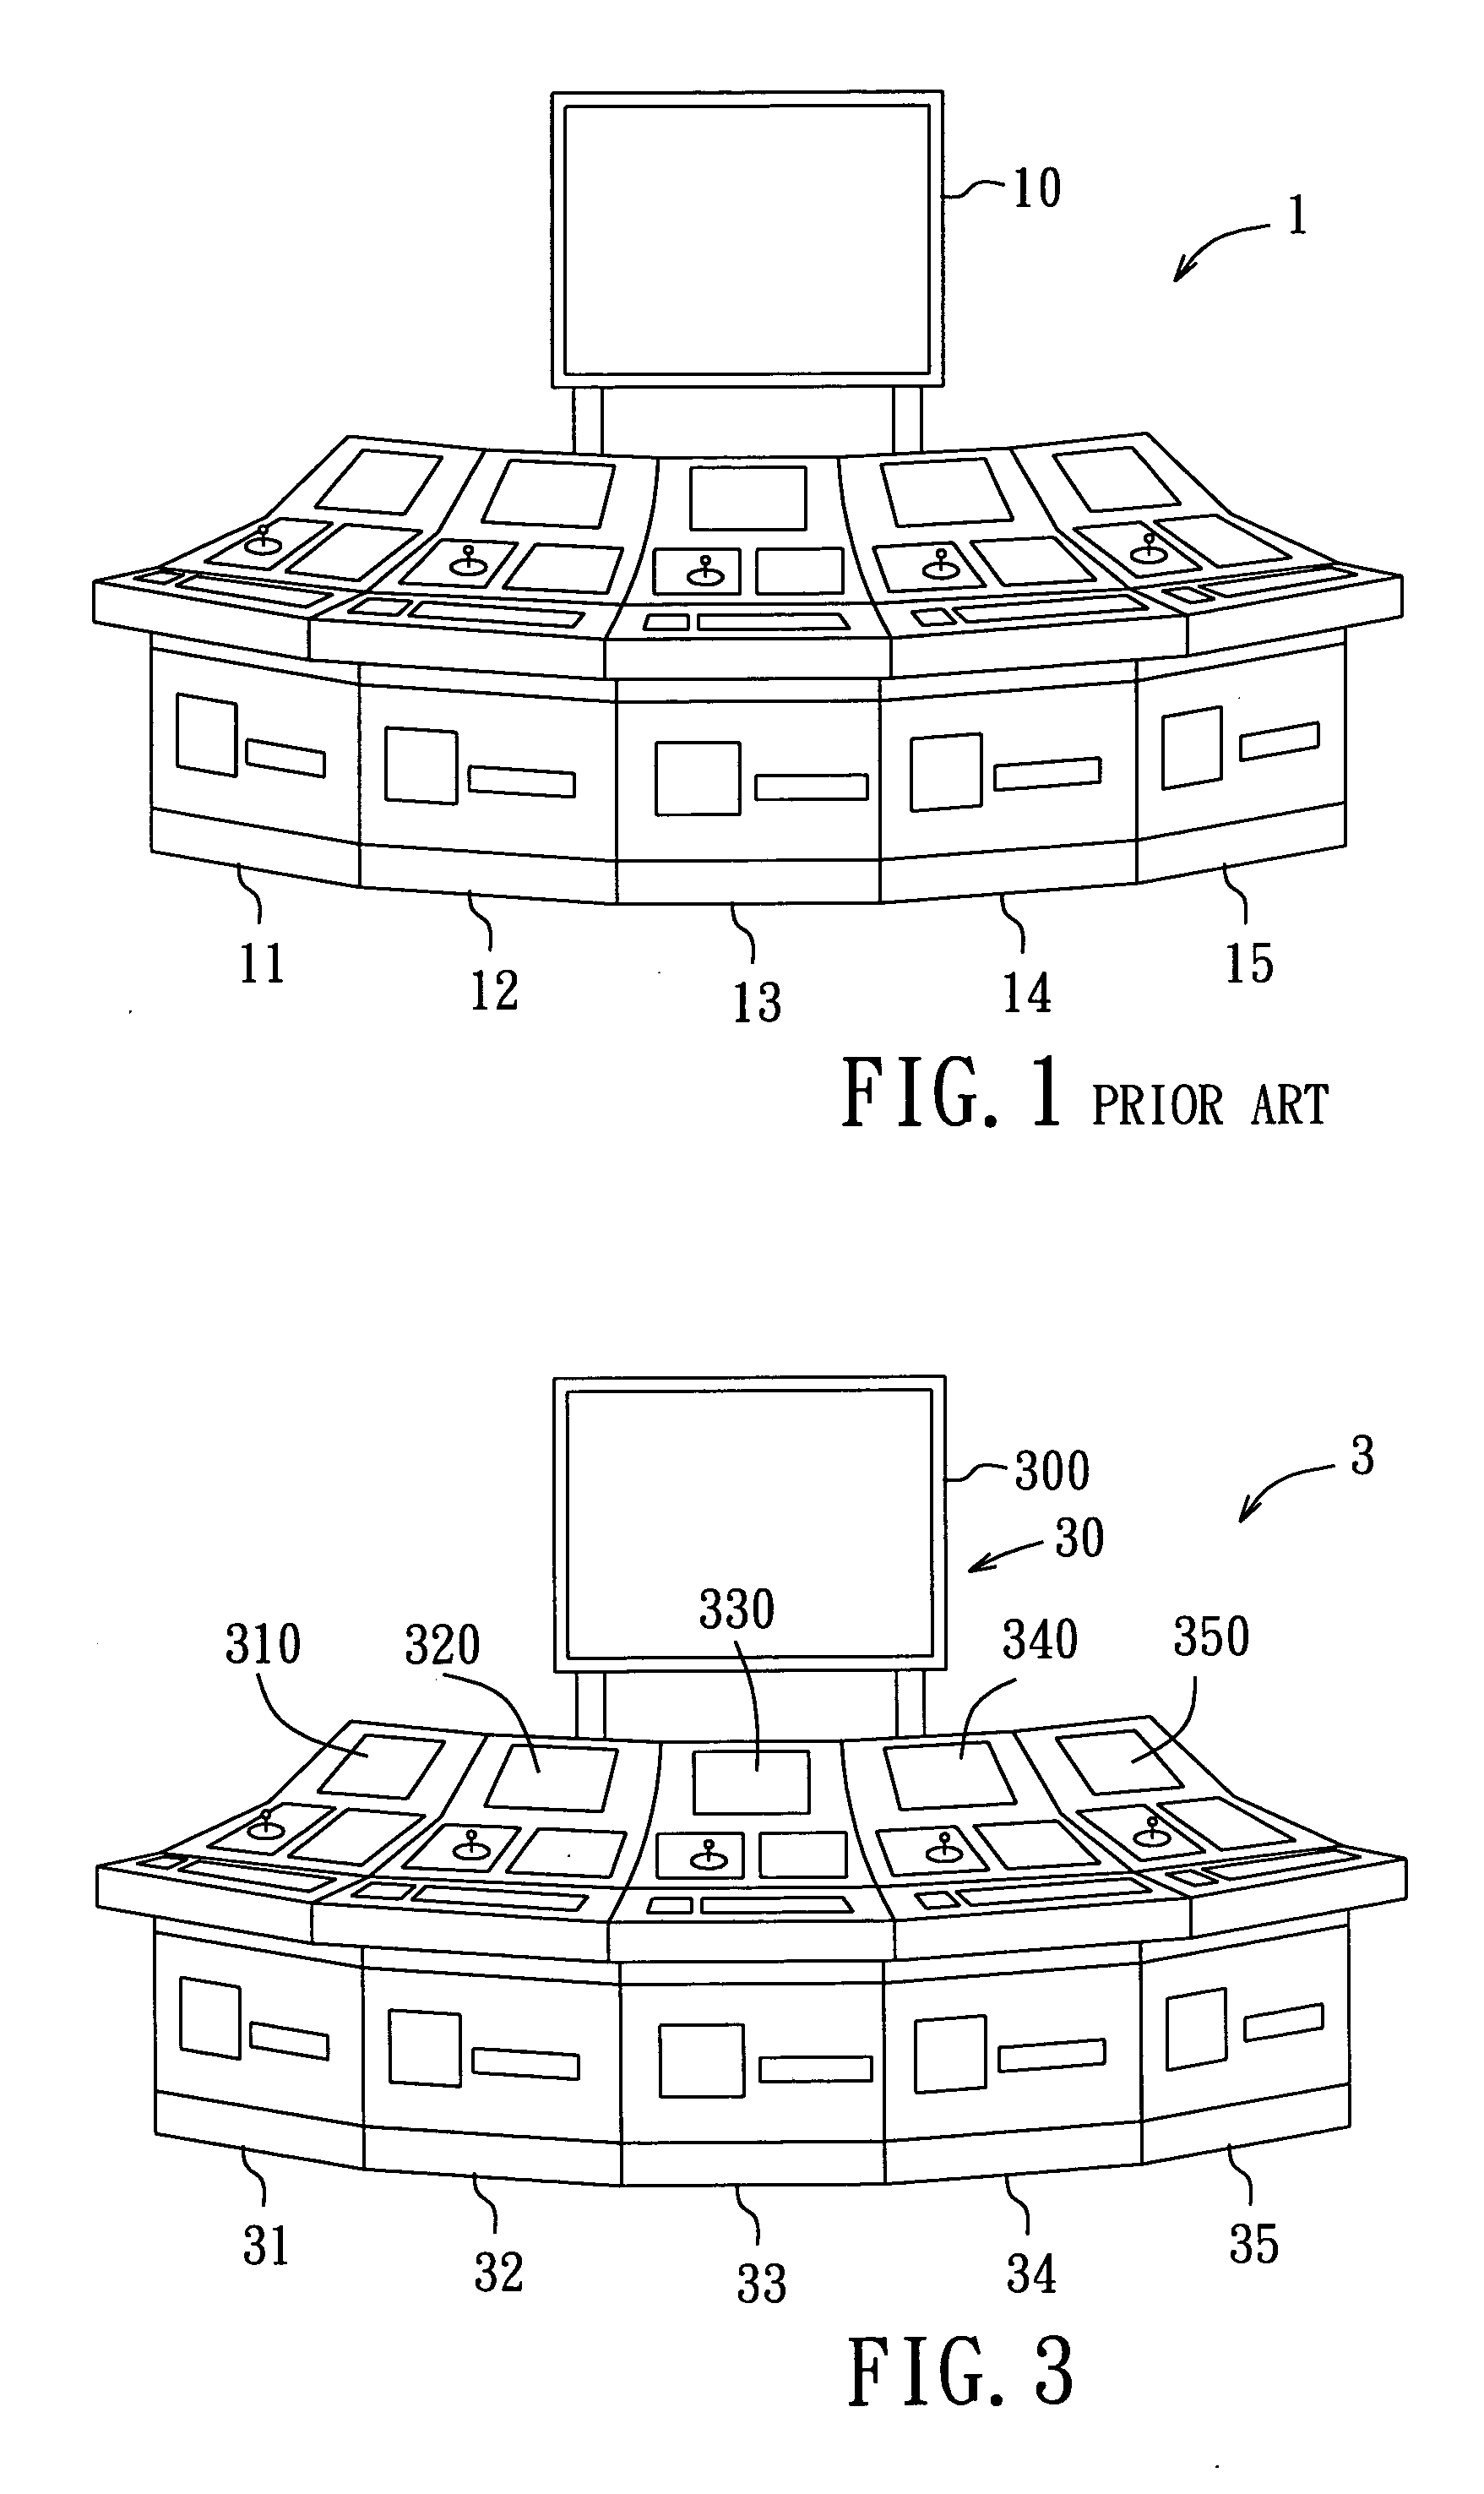 Multi-player gaming method and system with side betting option among players